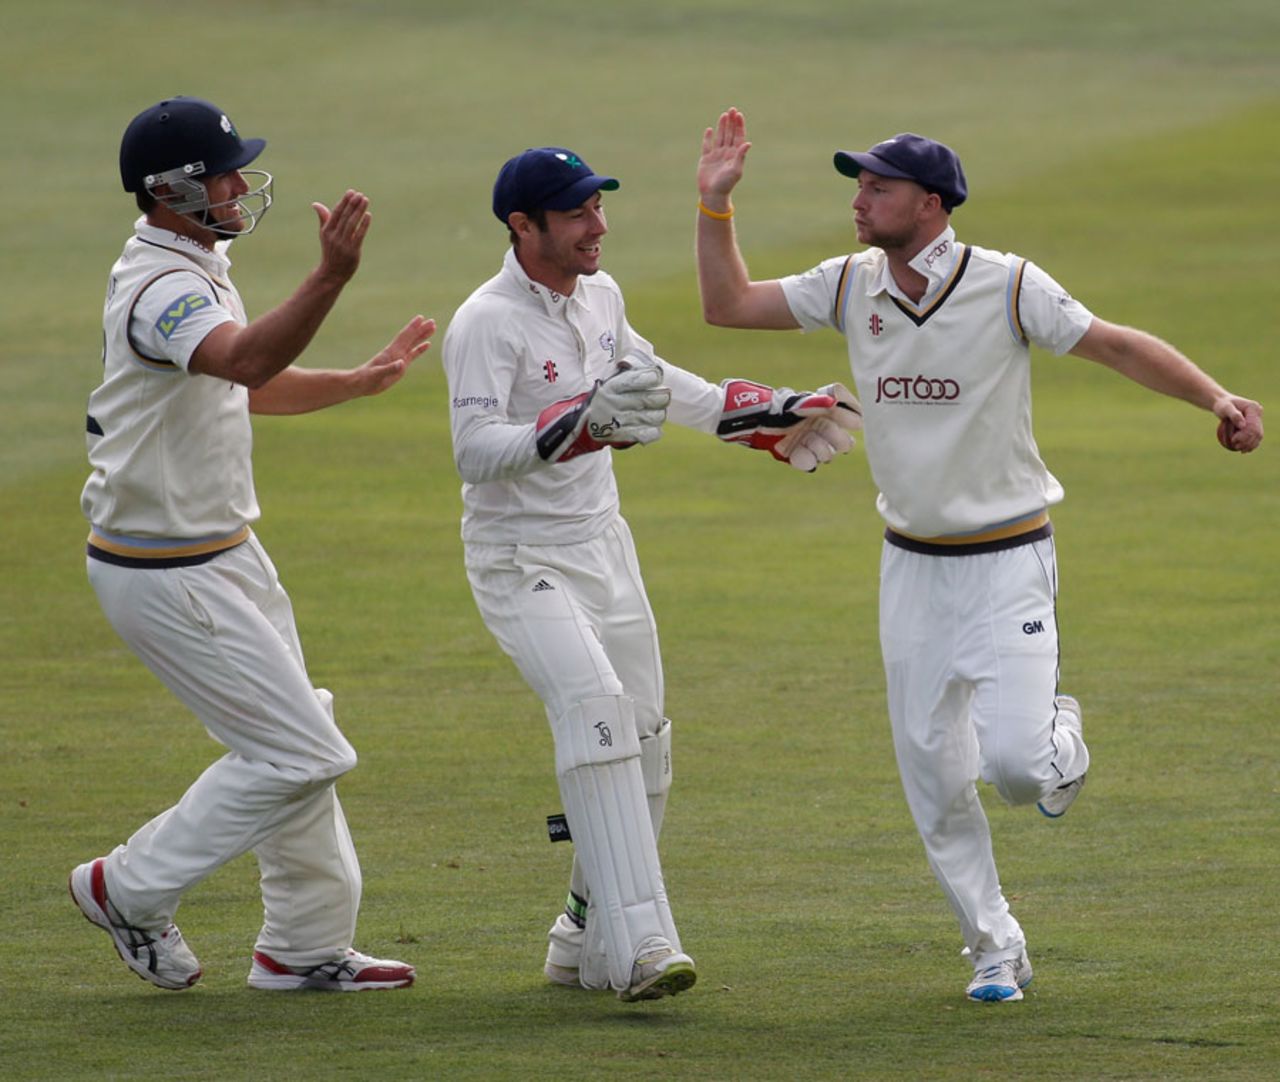 Adam Lyth celebrates taking the catch to remove Owais Shah, Coutny Championship, Division Two, Chelmsford, 2nd day, September 12, 2012